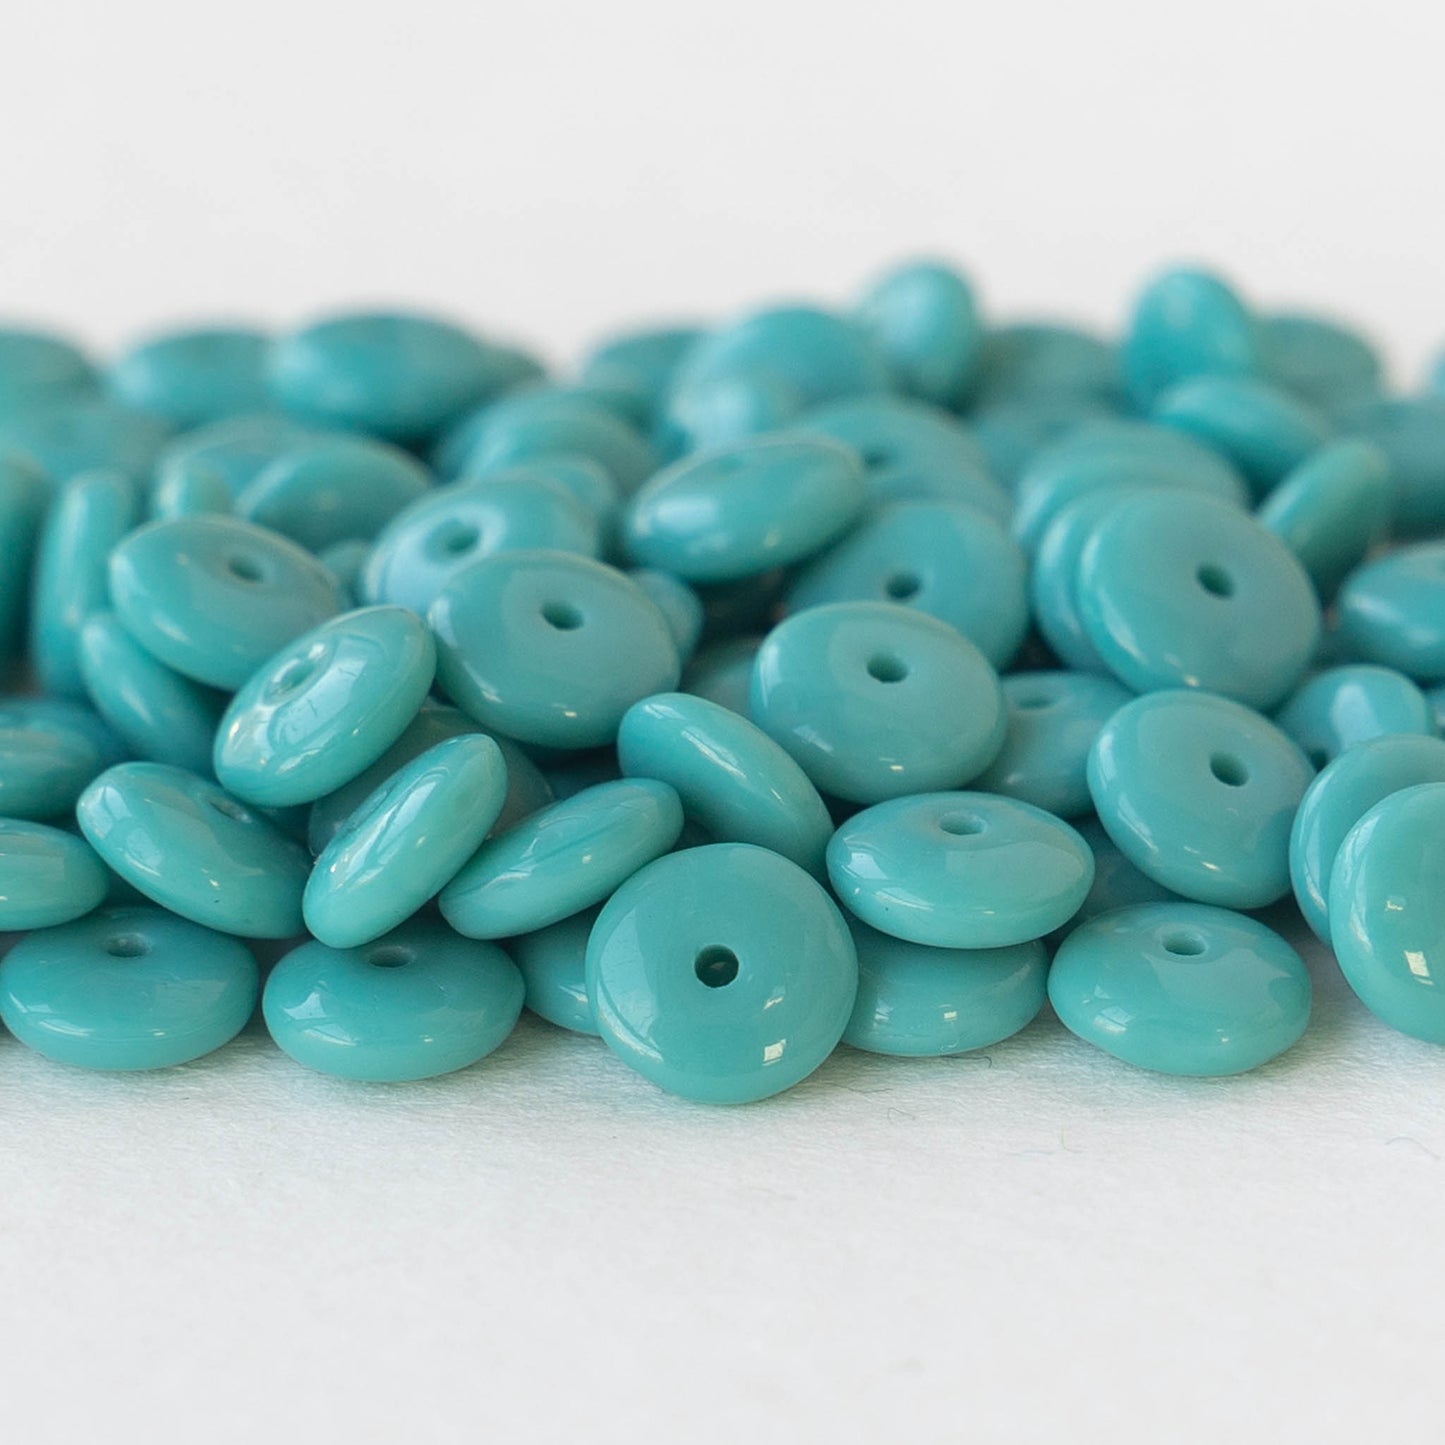 6mm Glass Rondelle Beads - Opaque Green Turquoise - 100 Beads